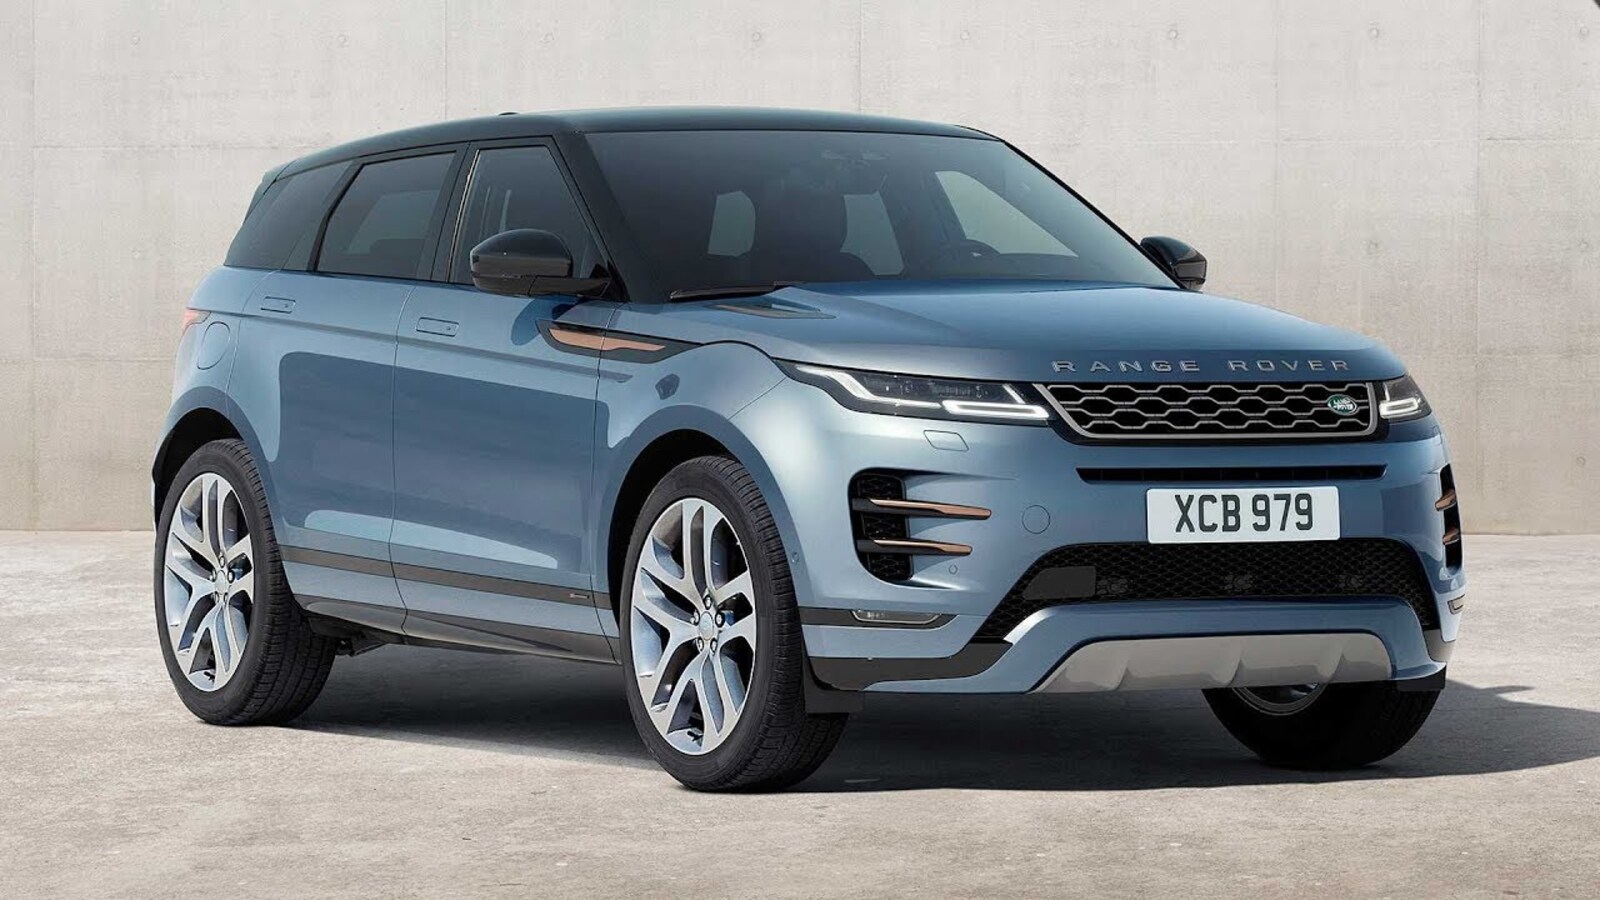 https://images.moneycontrol.com/static-mcnews/2019/03/RR-Evoque.jpg?impolicy=website&width=1600&height=900